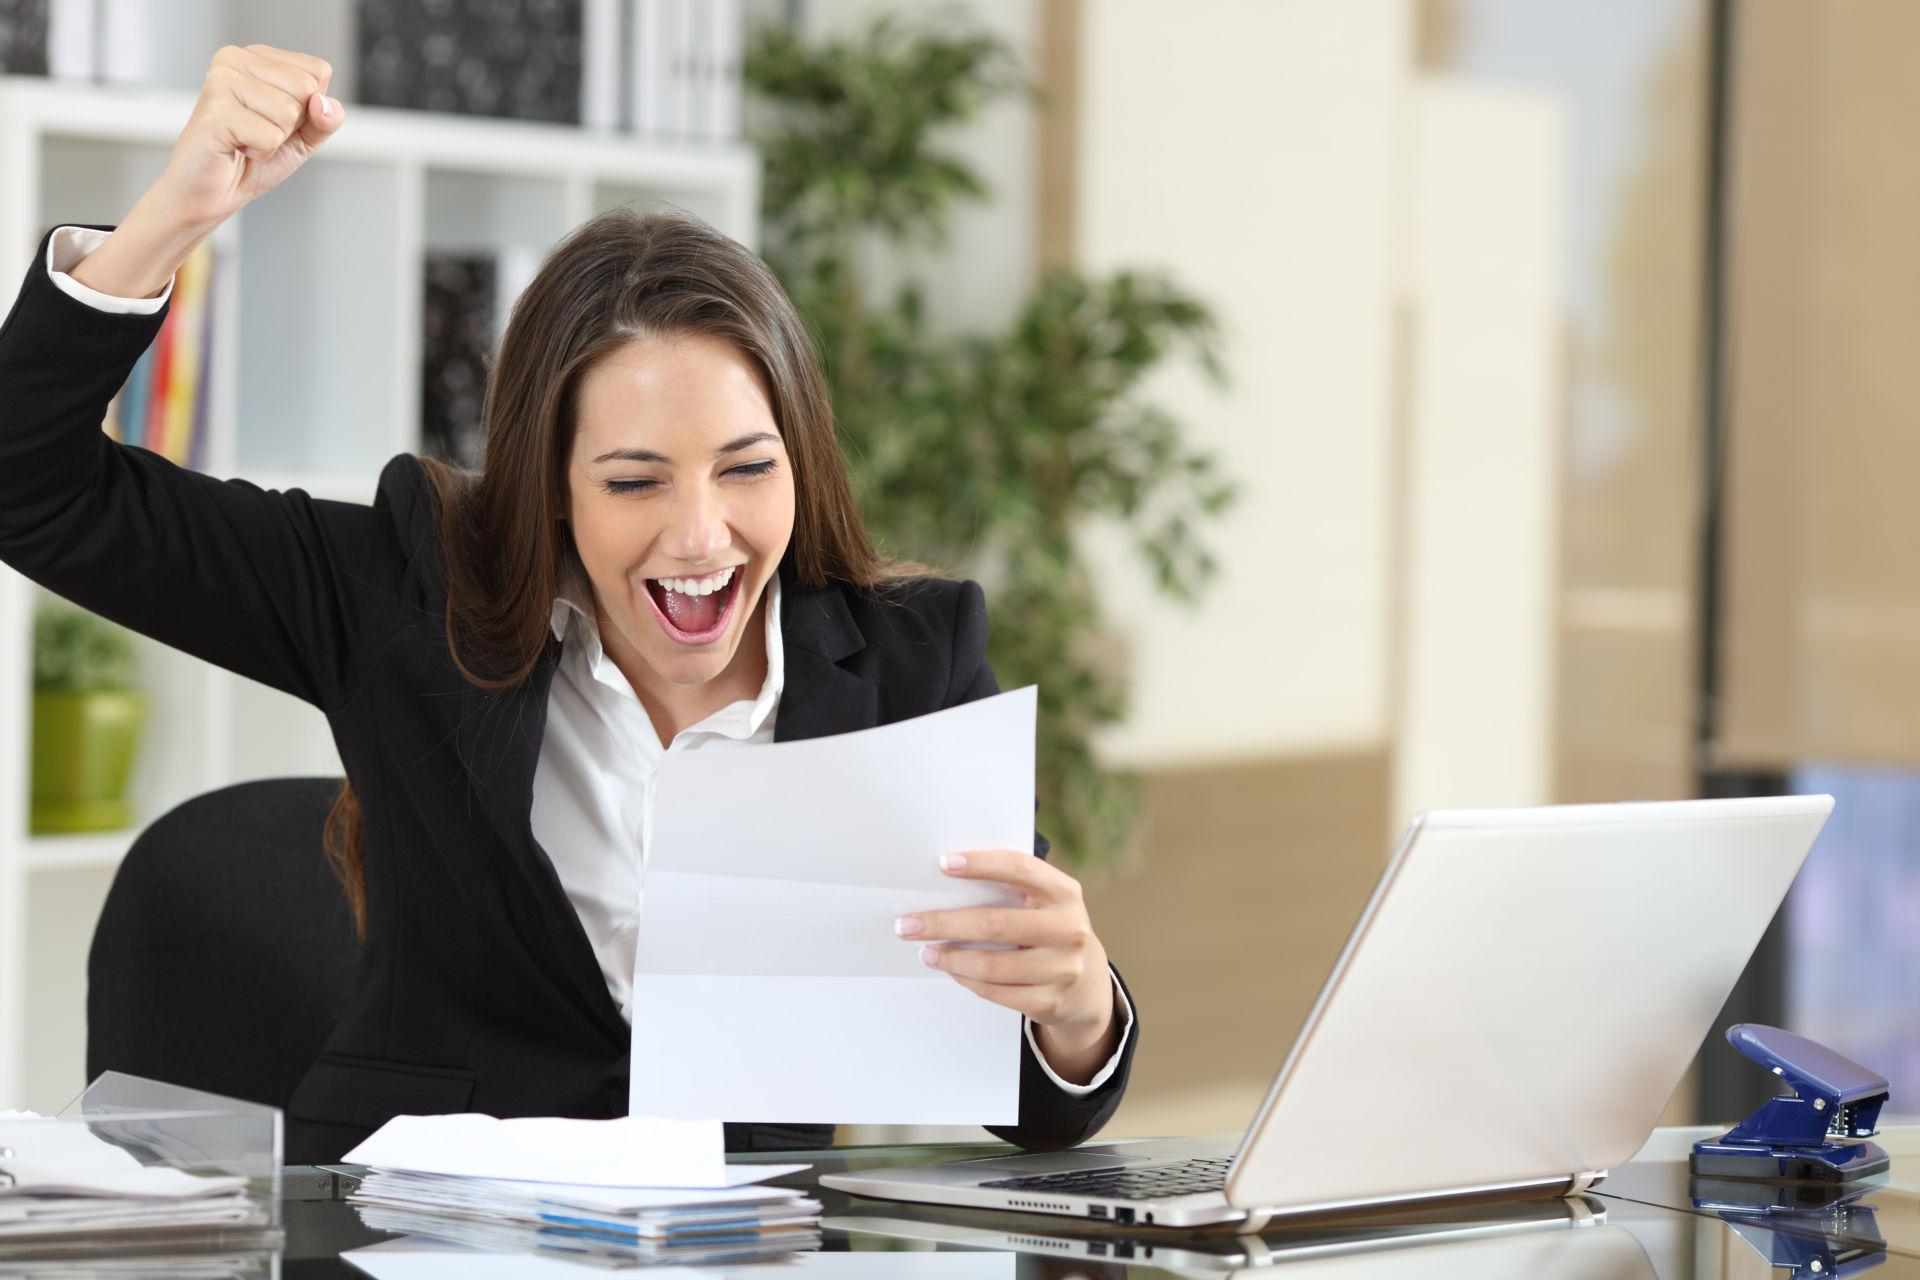 A young woman is in her office feeling excited to secure her finances with a personal line of credit.